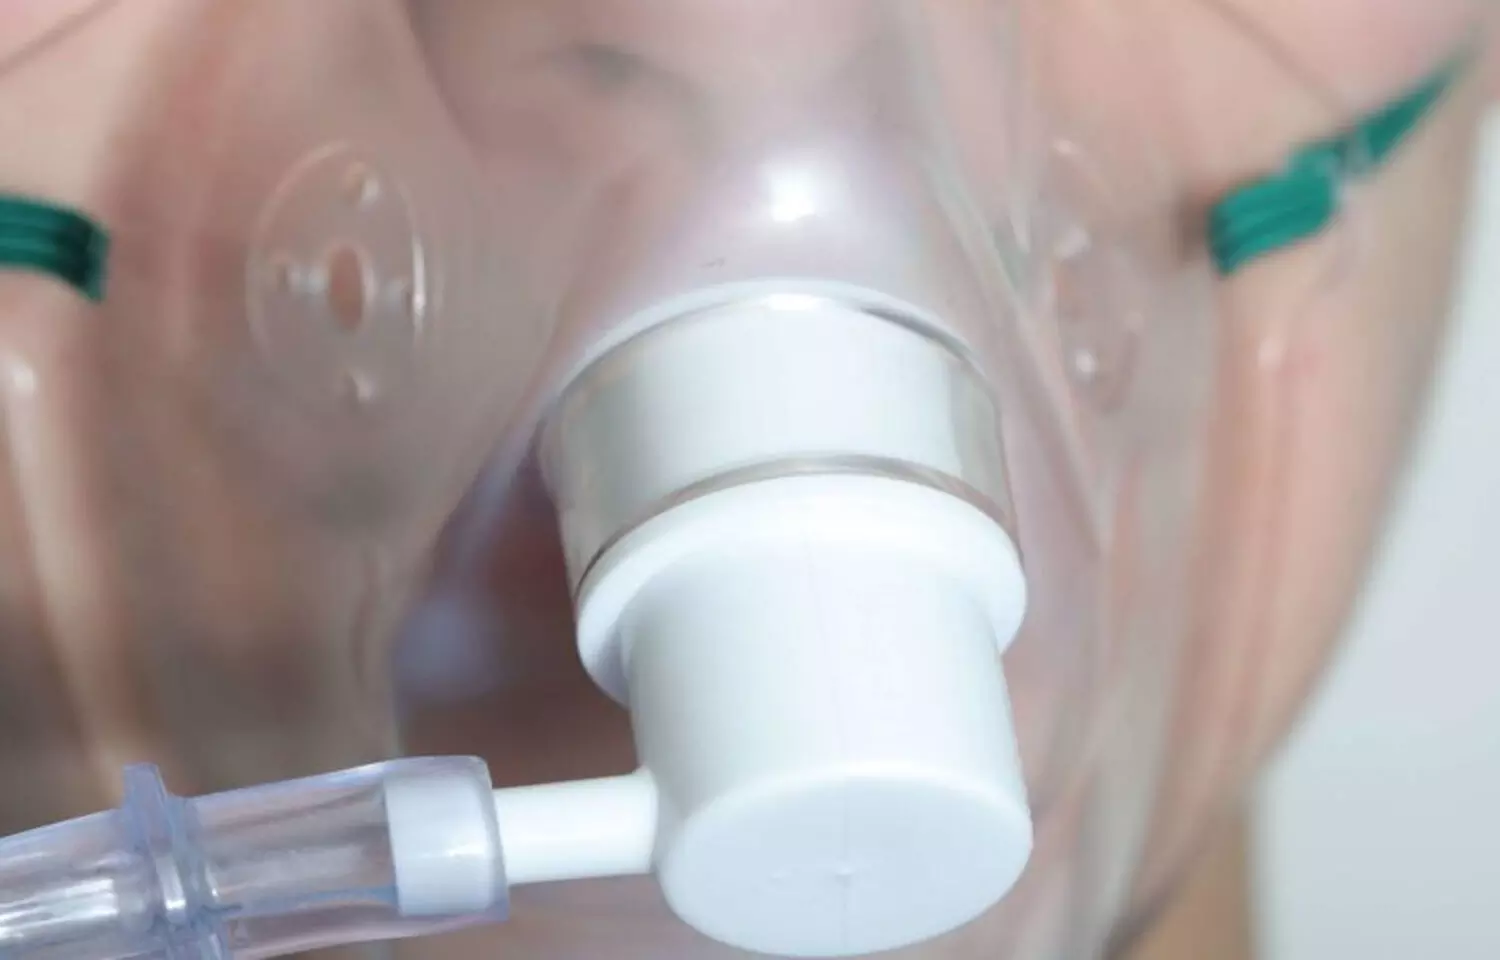 High-flow oxygen through nasal cannula reduces mechanical ventilation need in severe Covid-19: Study